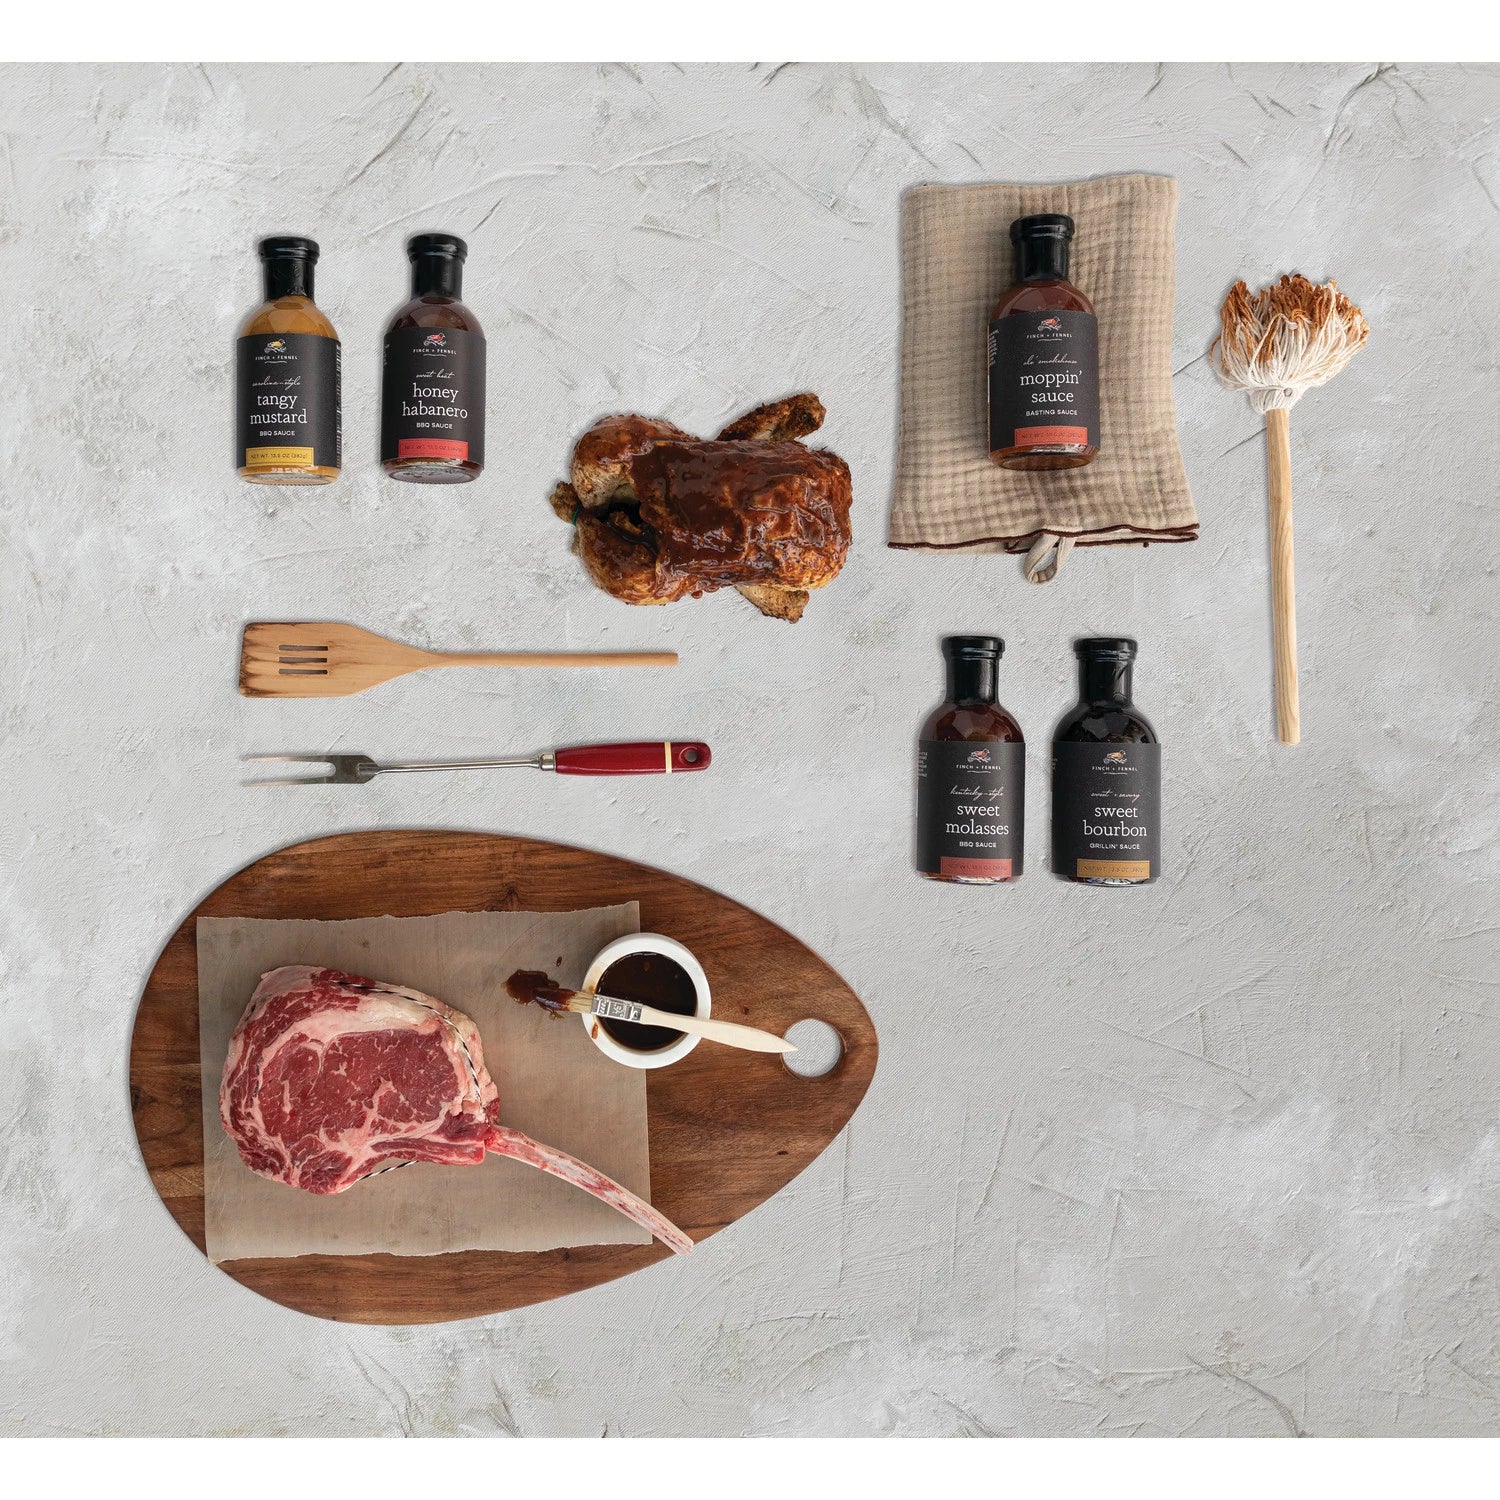 multiple bottles of sauce laying next to a cutting board with a uncooked steak, grilling tools, grill mop and towel on a light gray surface